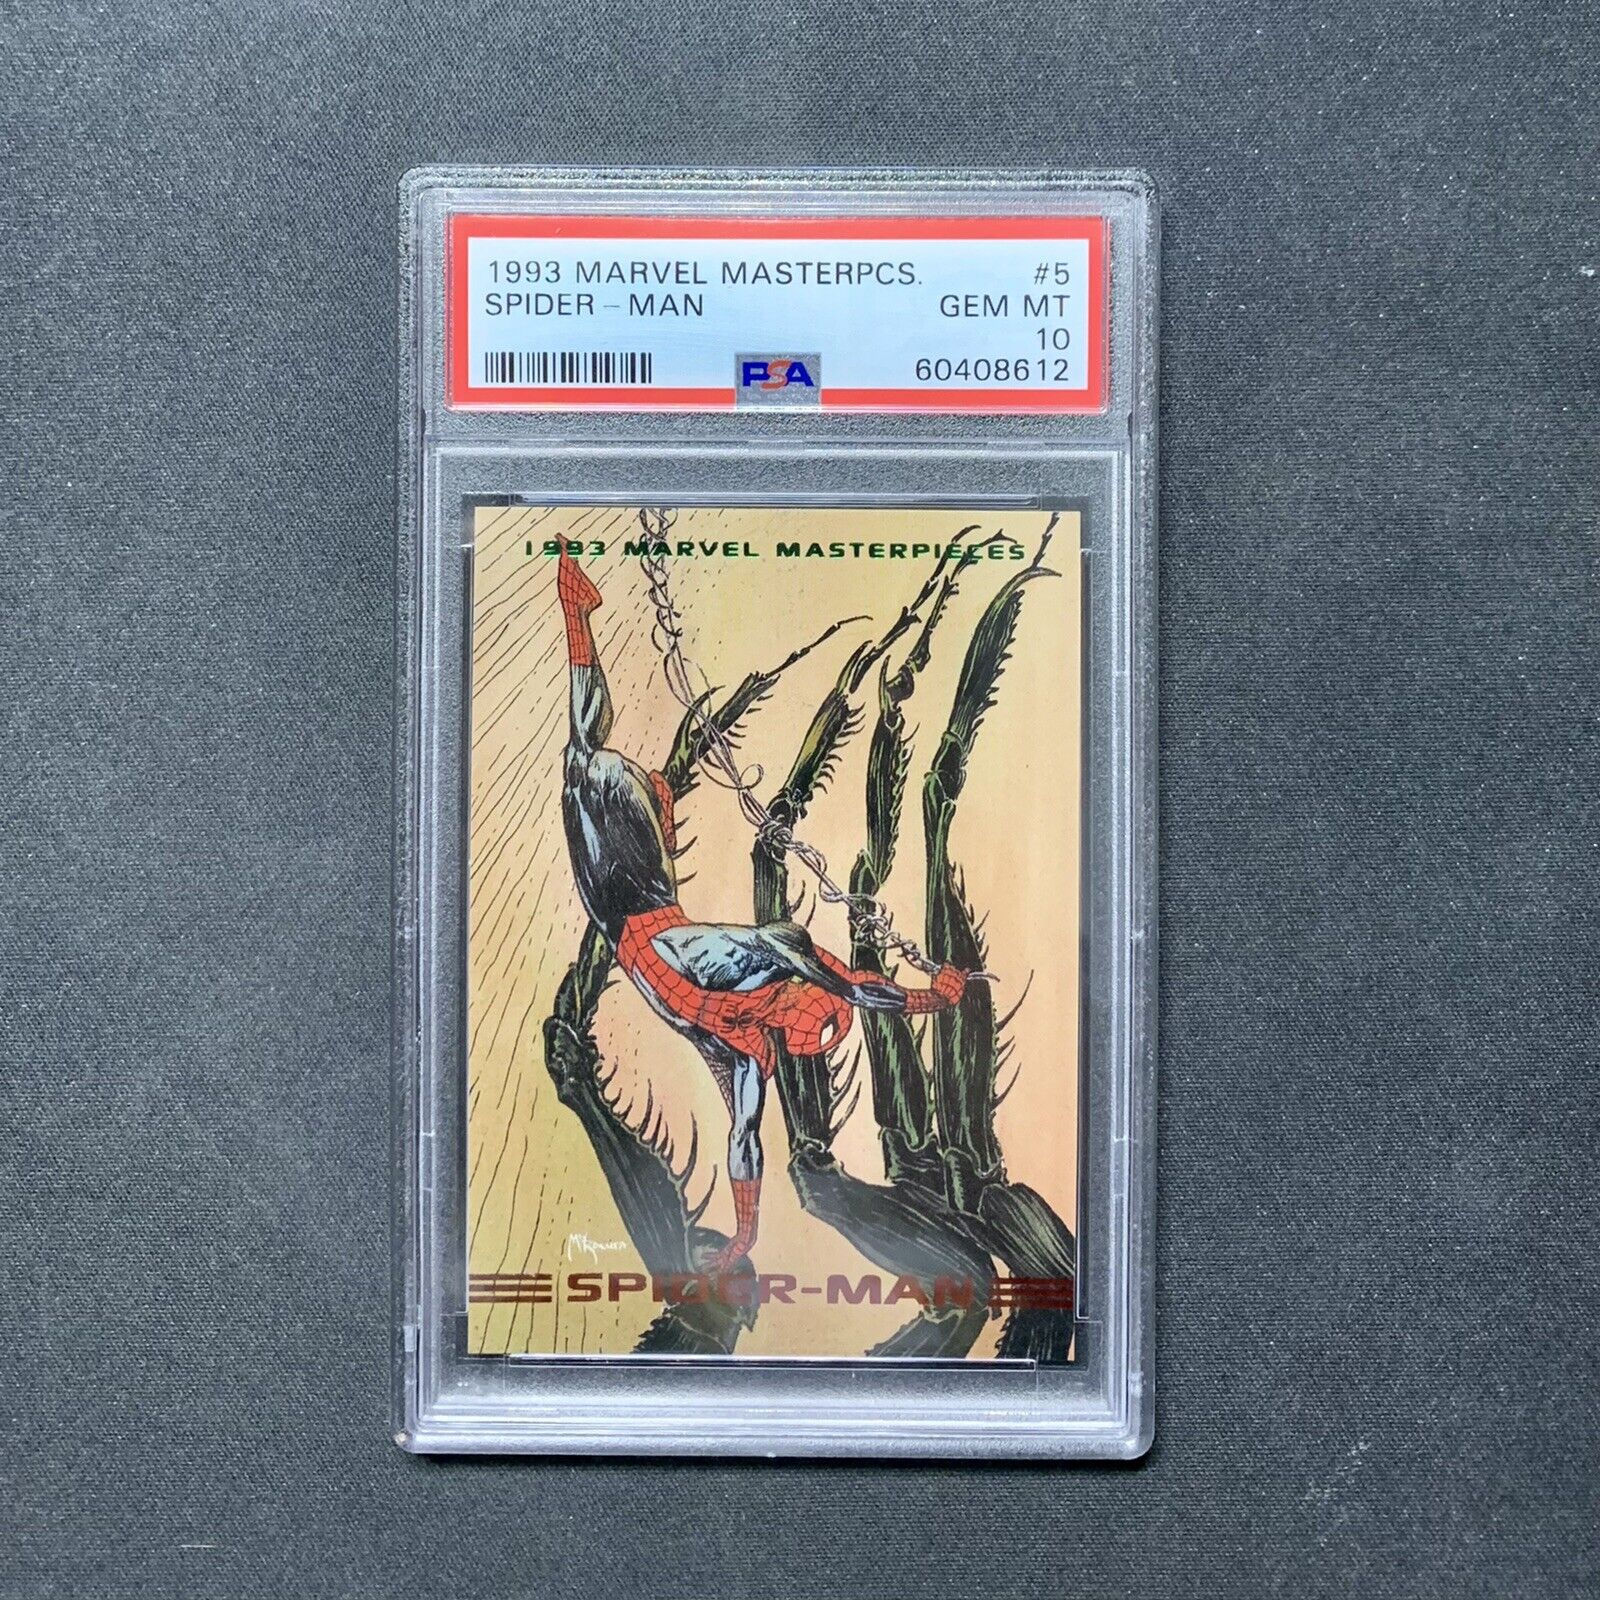 1993 Marvel Masterpieces #5 Spider-man PSA 10 💎LOW POP FREE INSURED SHIPPING